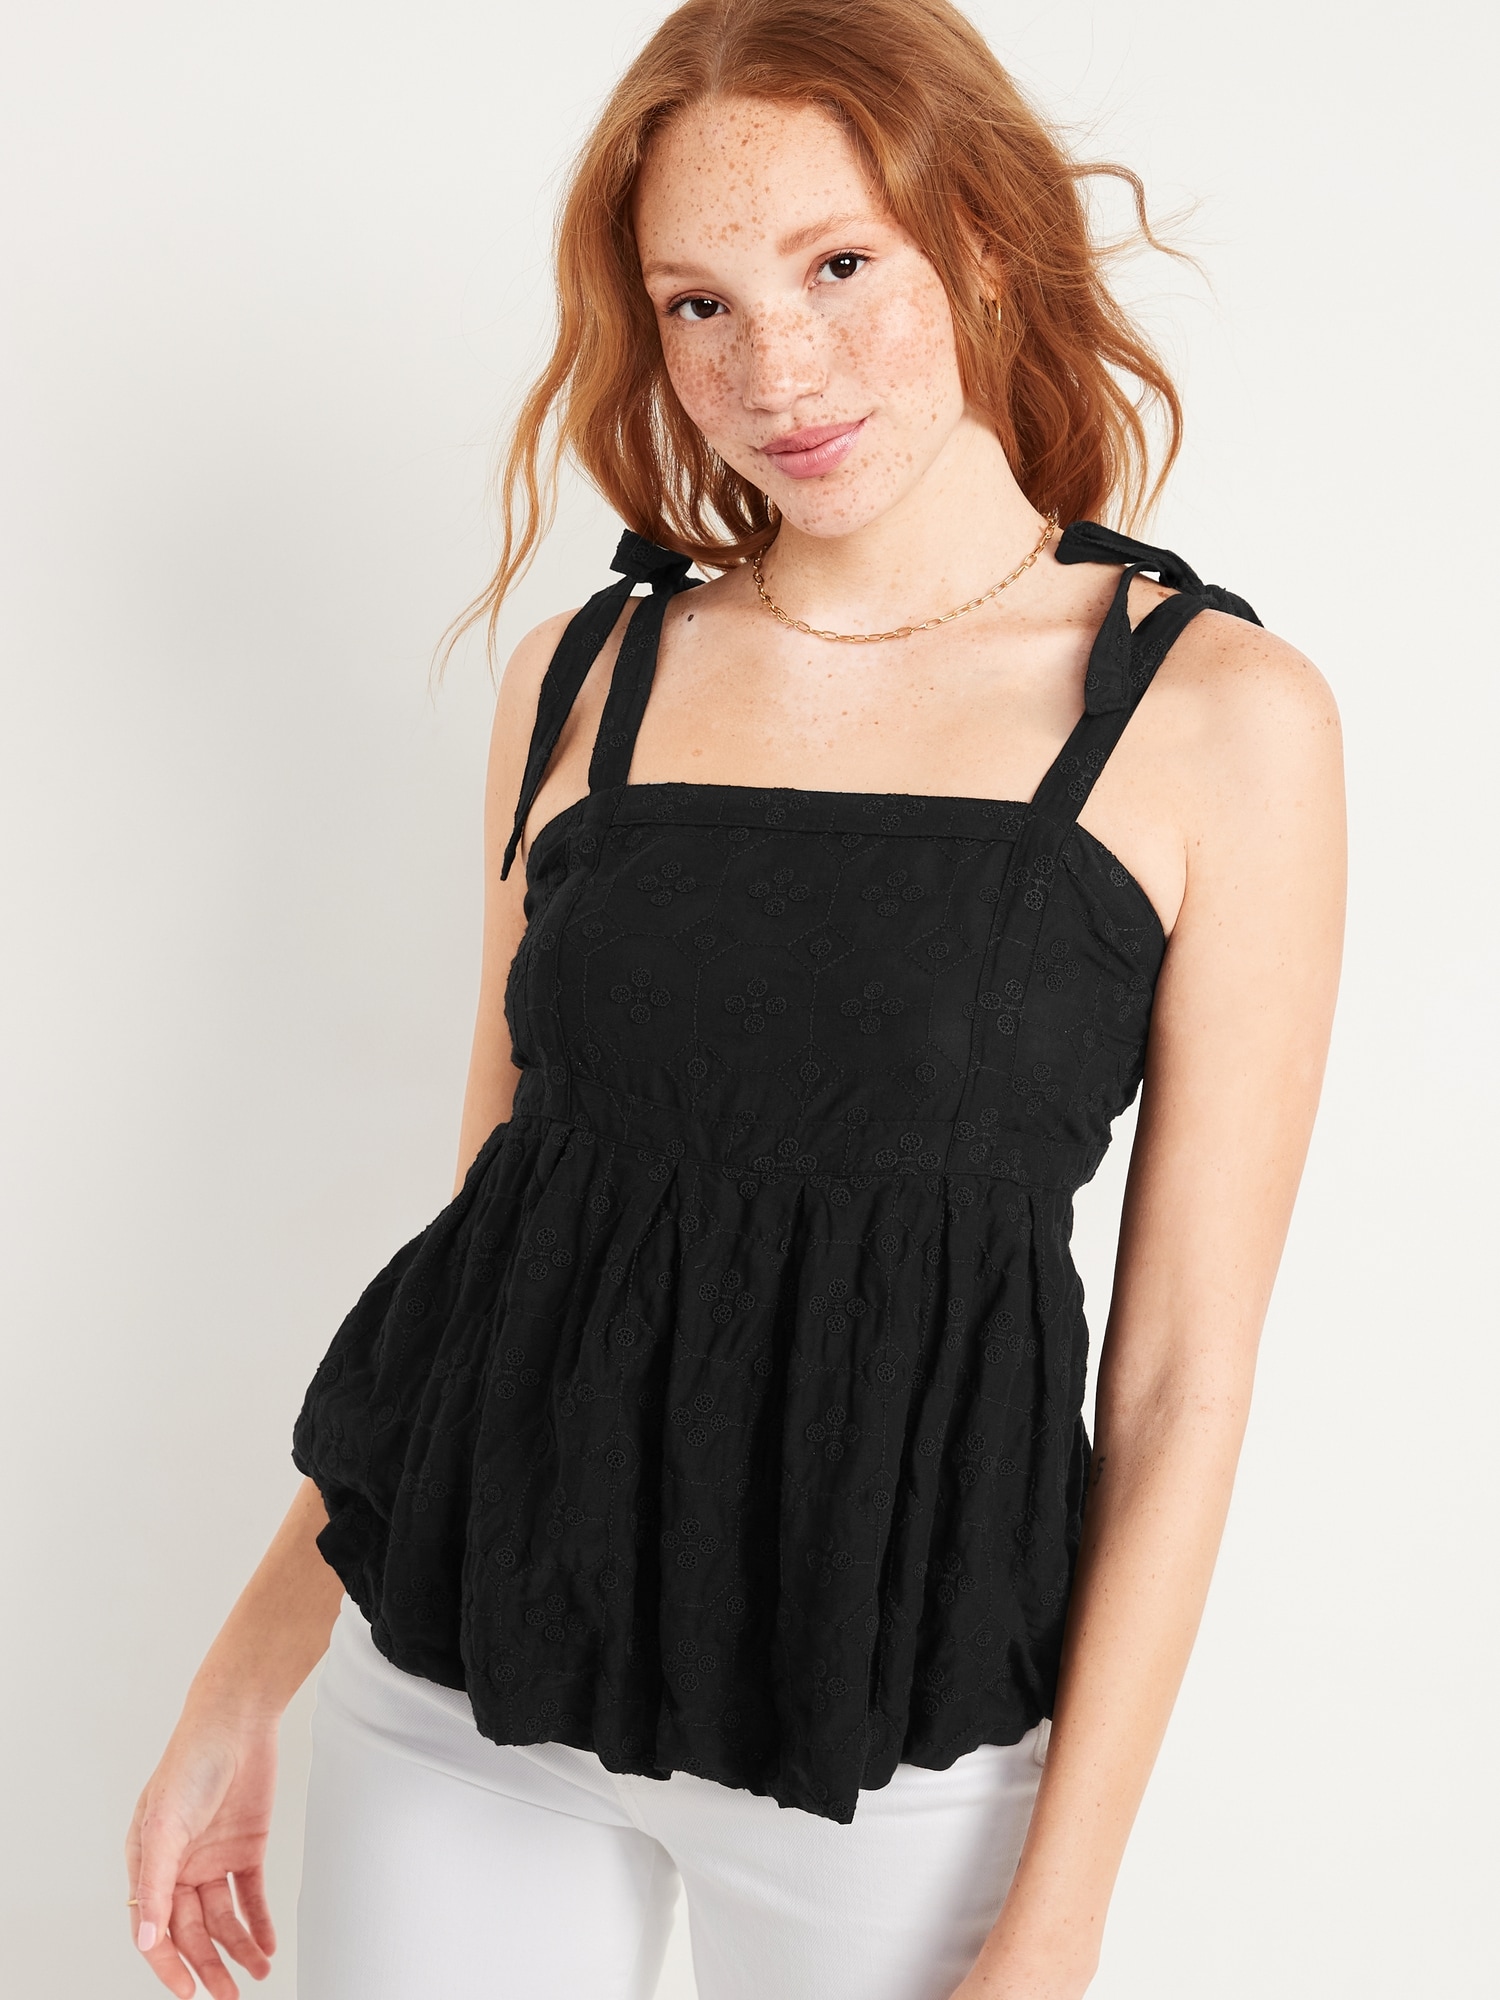 Old Navy Tie-Shoulder Embroidered Babydoll Cami Swing Top for Women black. 1